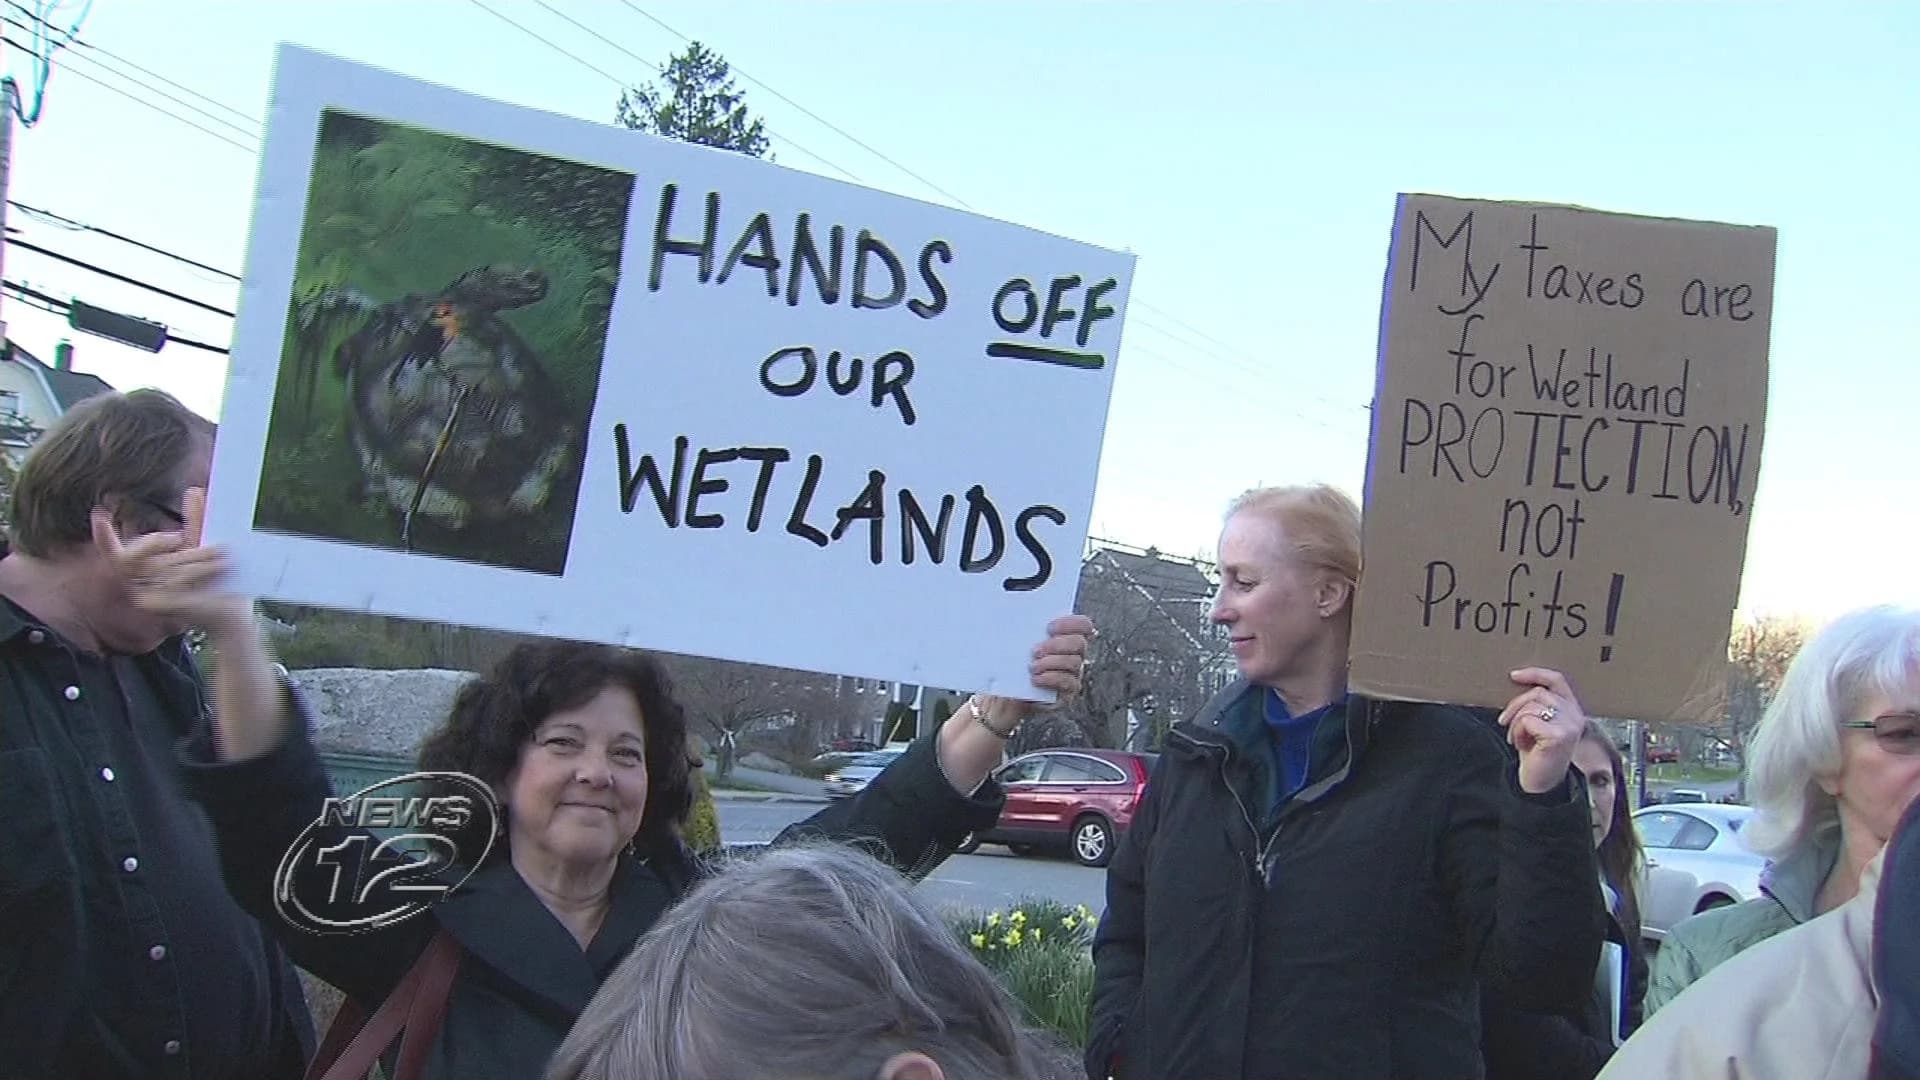 Yorktown residents rally over reduced wetlands